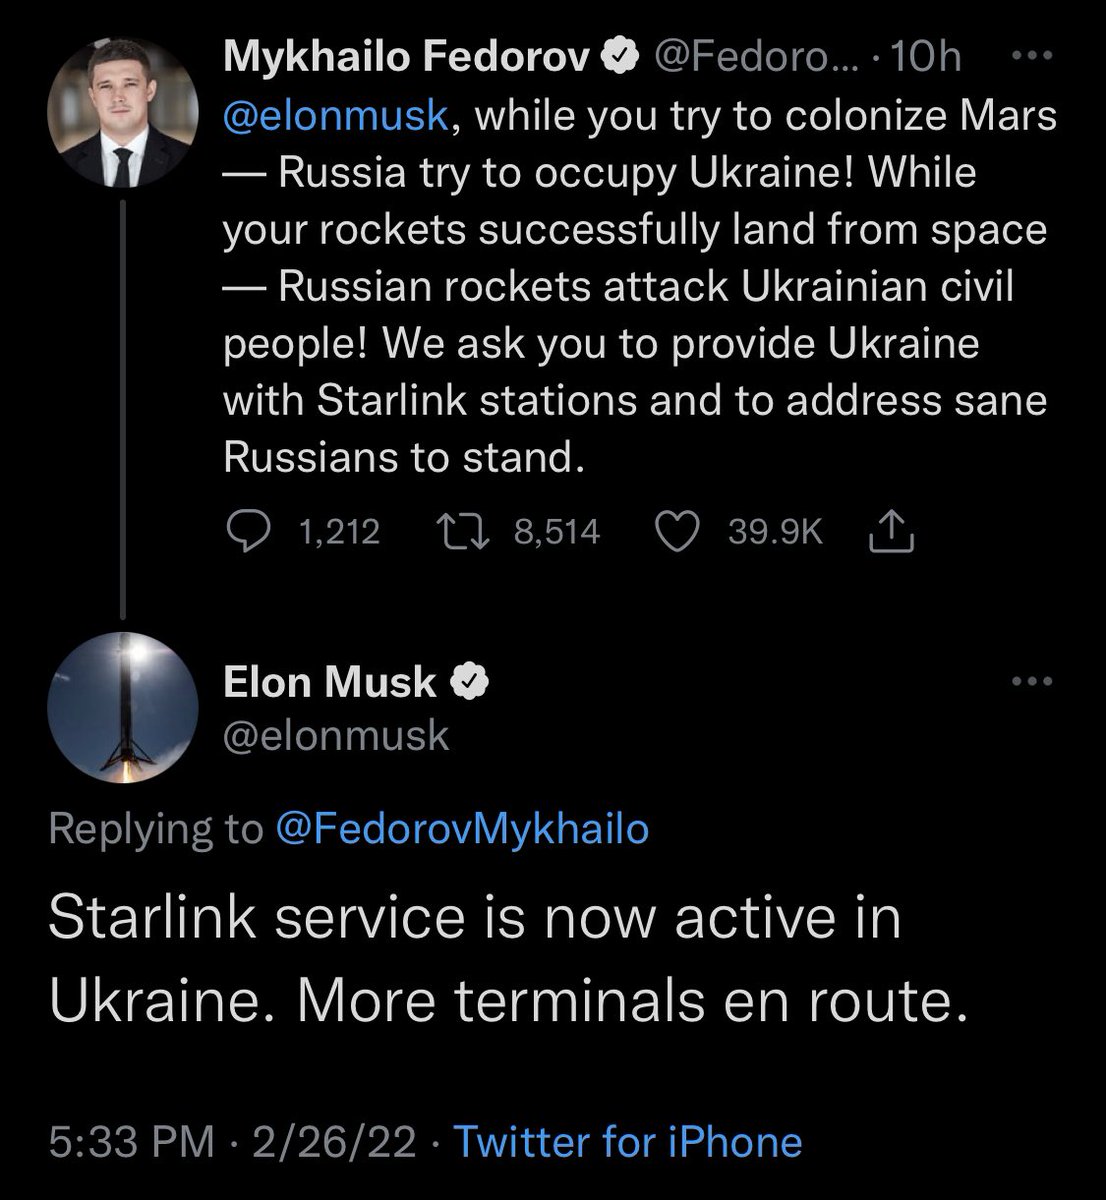 Pomp 🌪 on Twitter: "The Vice Prime Minister of Ukraine asked Elon Musk to  get Starlink internet service to Ukraine and Elon responded 10 hours later  that it was done. Just incredible.